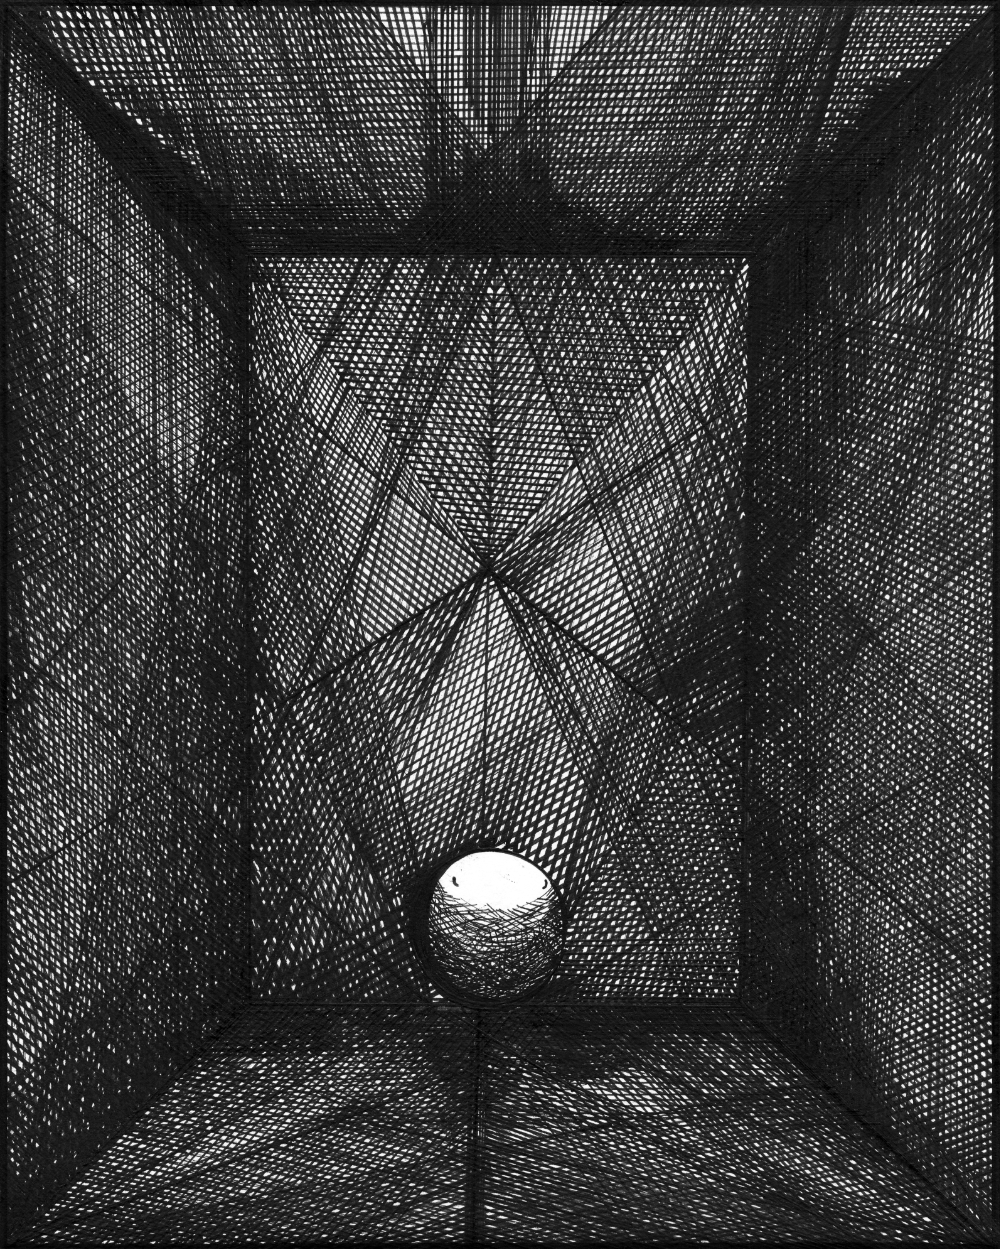 thumbnail of Lines #2 by Jonnathan Rojas. medium: print. date: 2011. dimensions: 8 x 10 inches